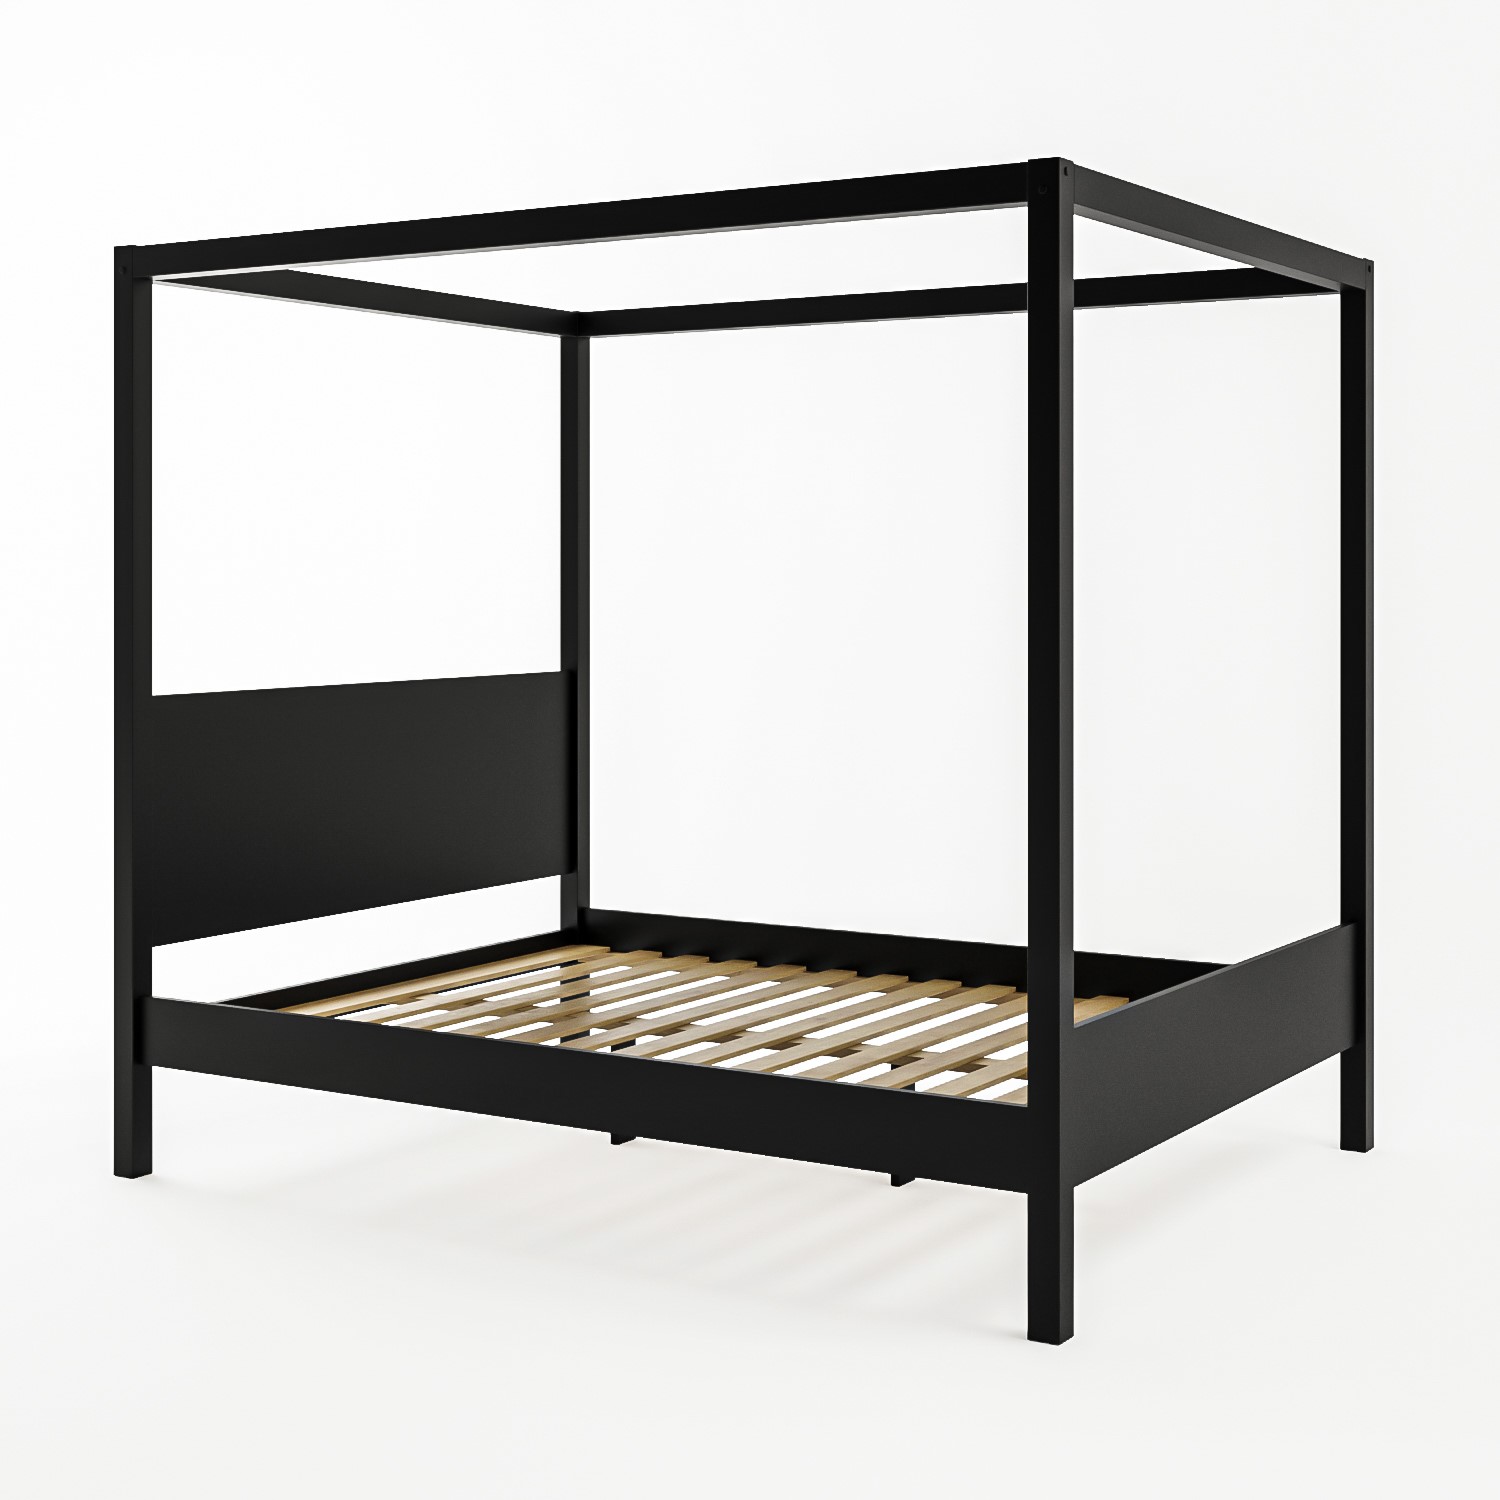 Read more about King size four poster bed frame in black victoria